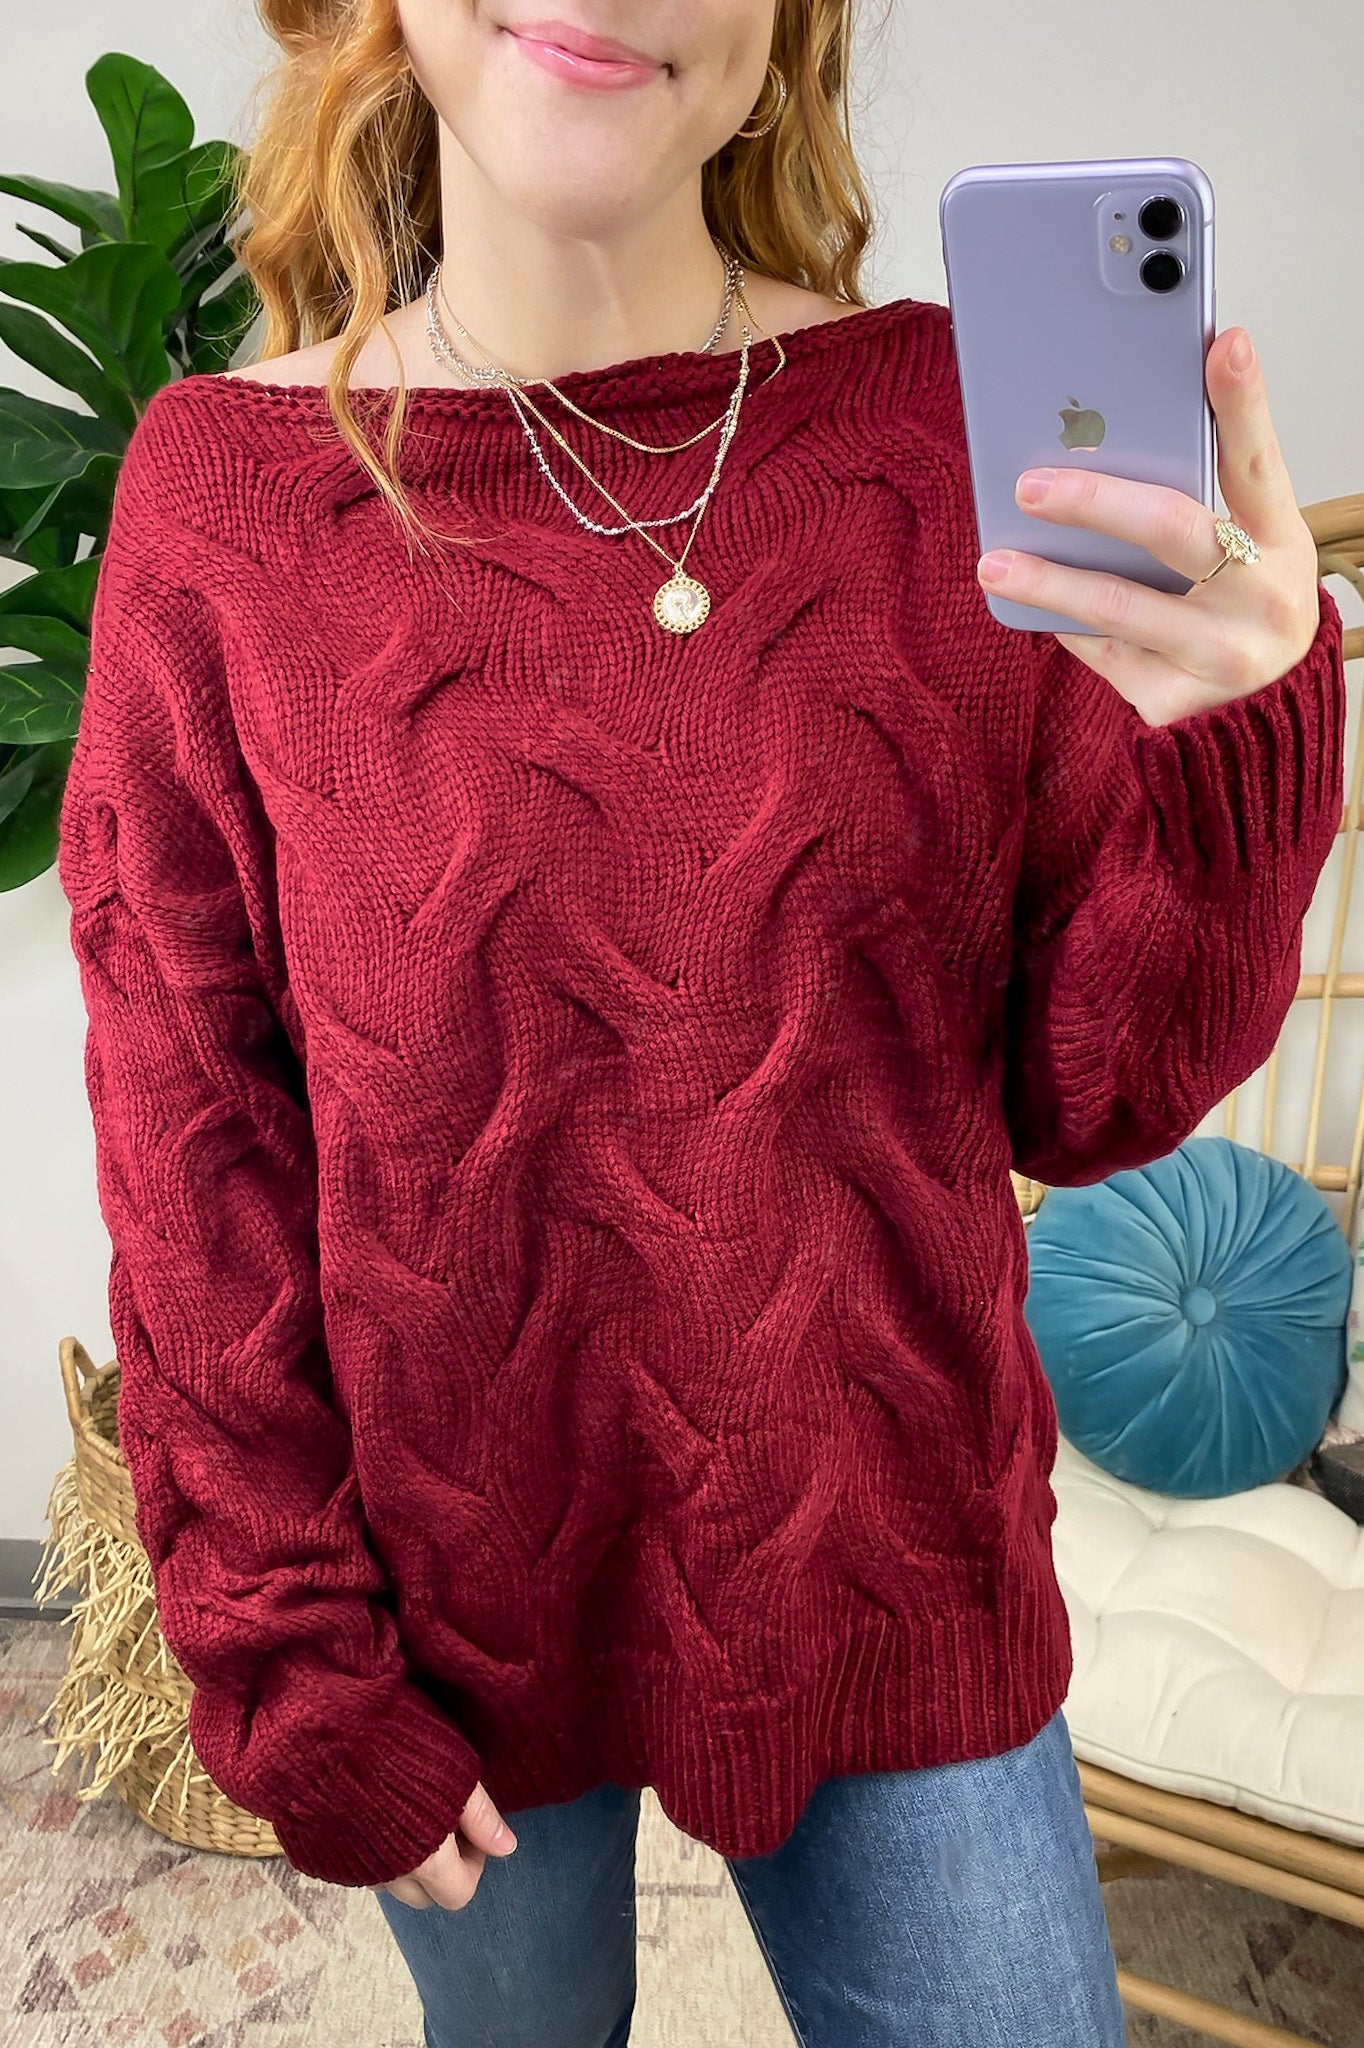  Suriel Textured Cable Knit Boat Neck Sweater - Madison and Mallory